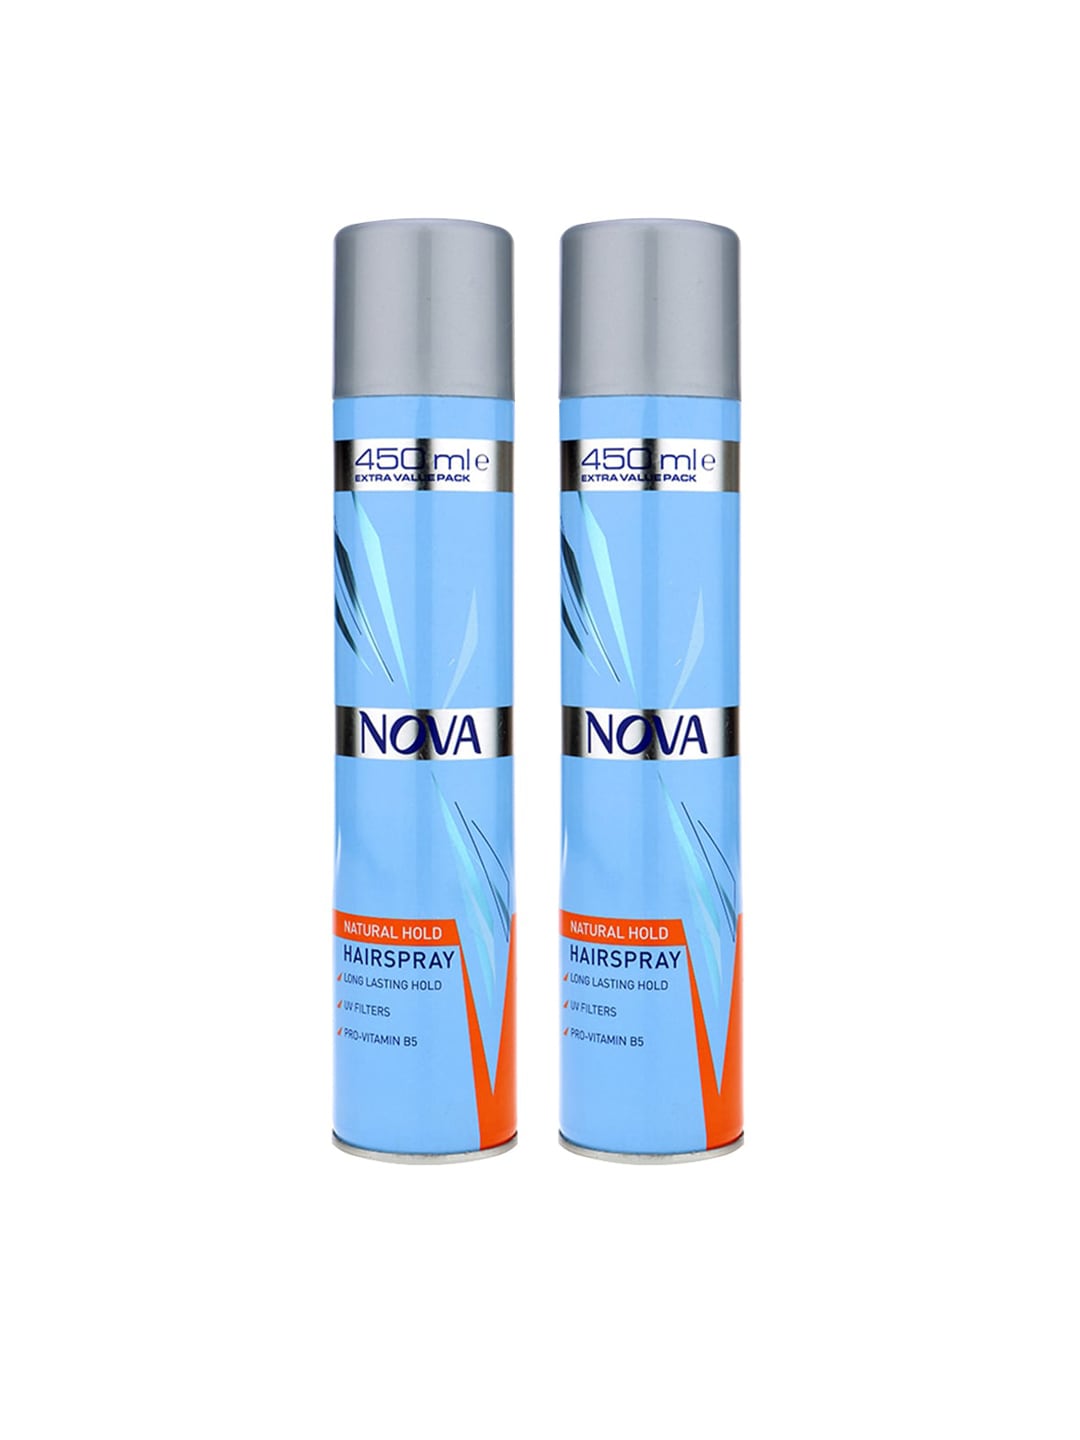 Nova Unisex Blue Extra Hold Hair Spray, 450ml (Pack of 2) Price in India